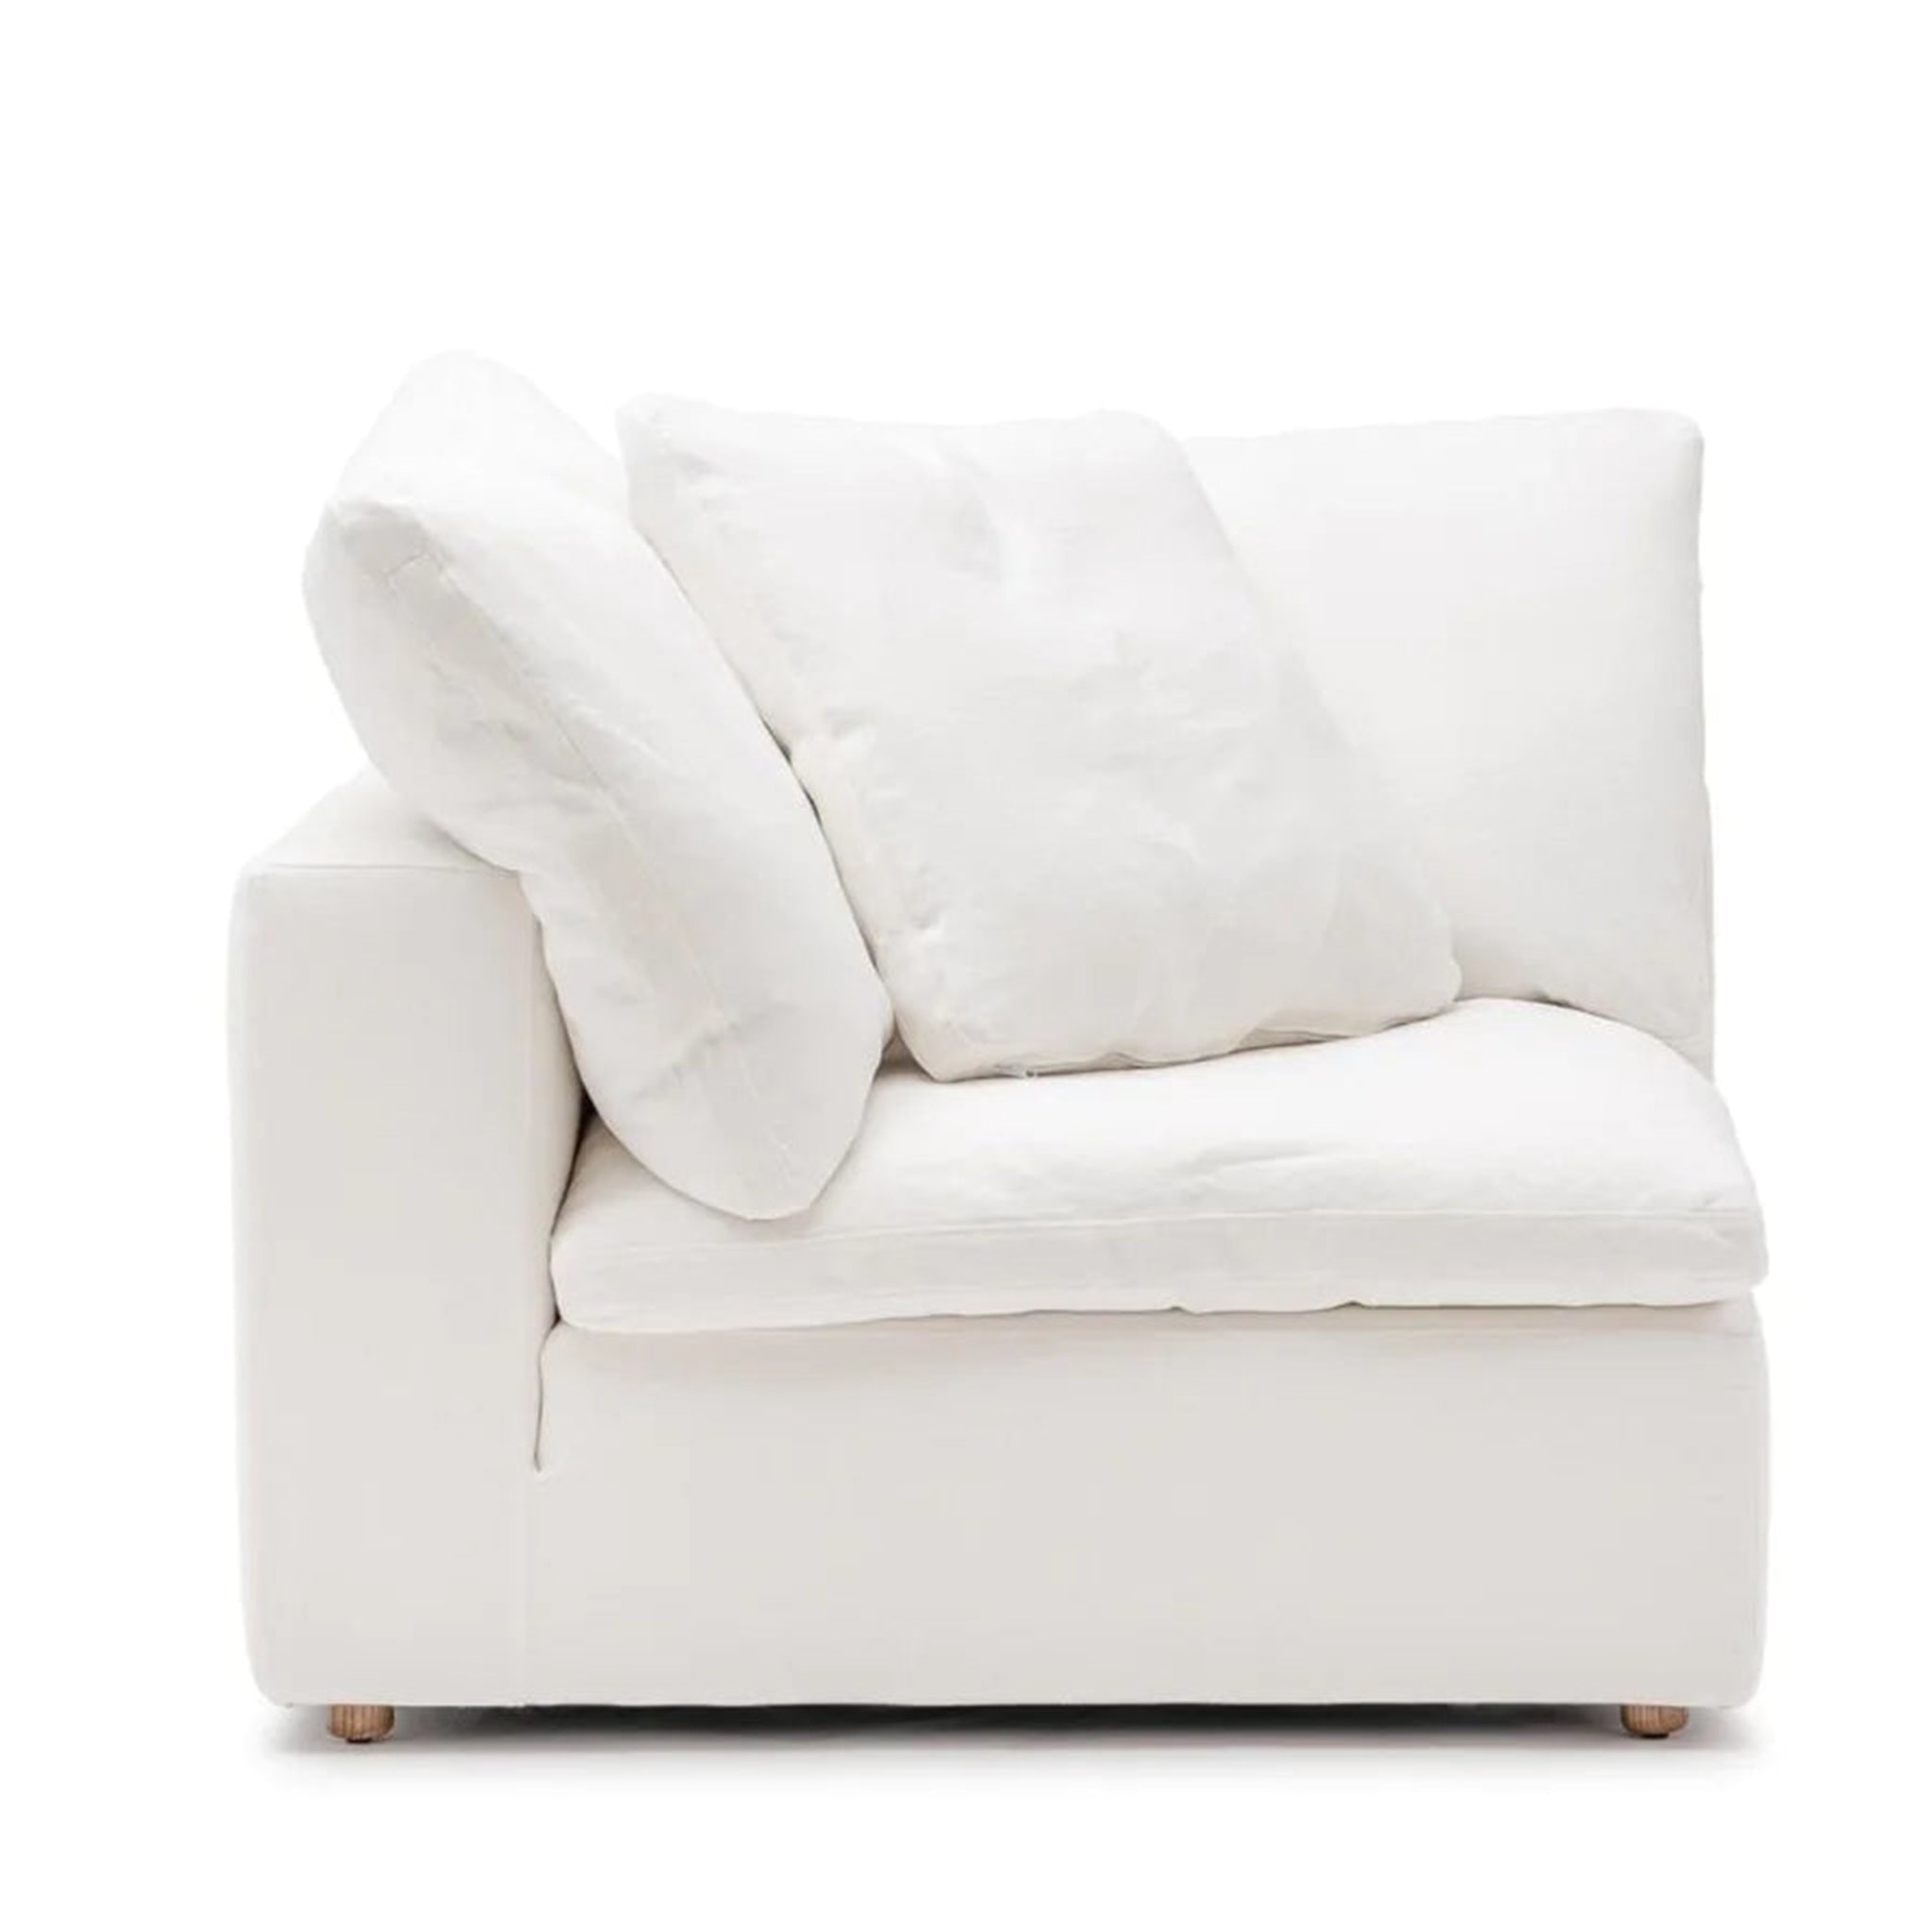 White curved Constance sofa with button-tufted back in a modern living room